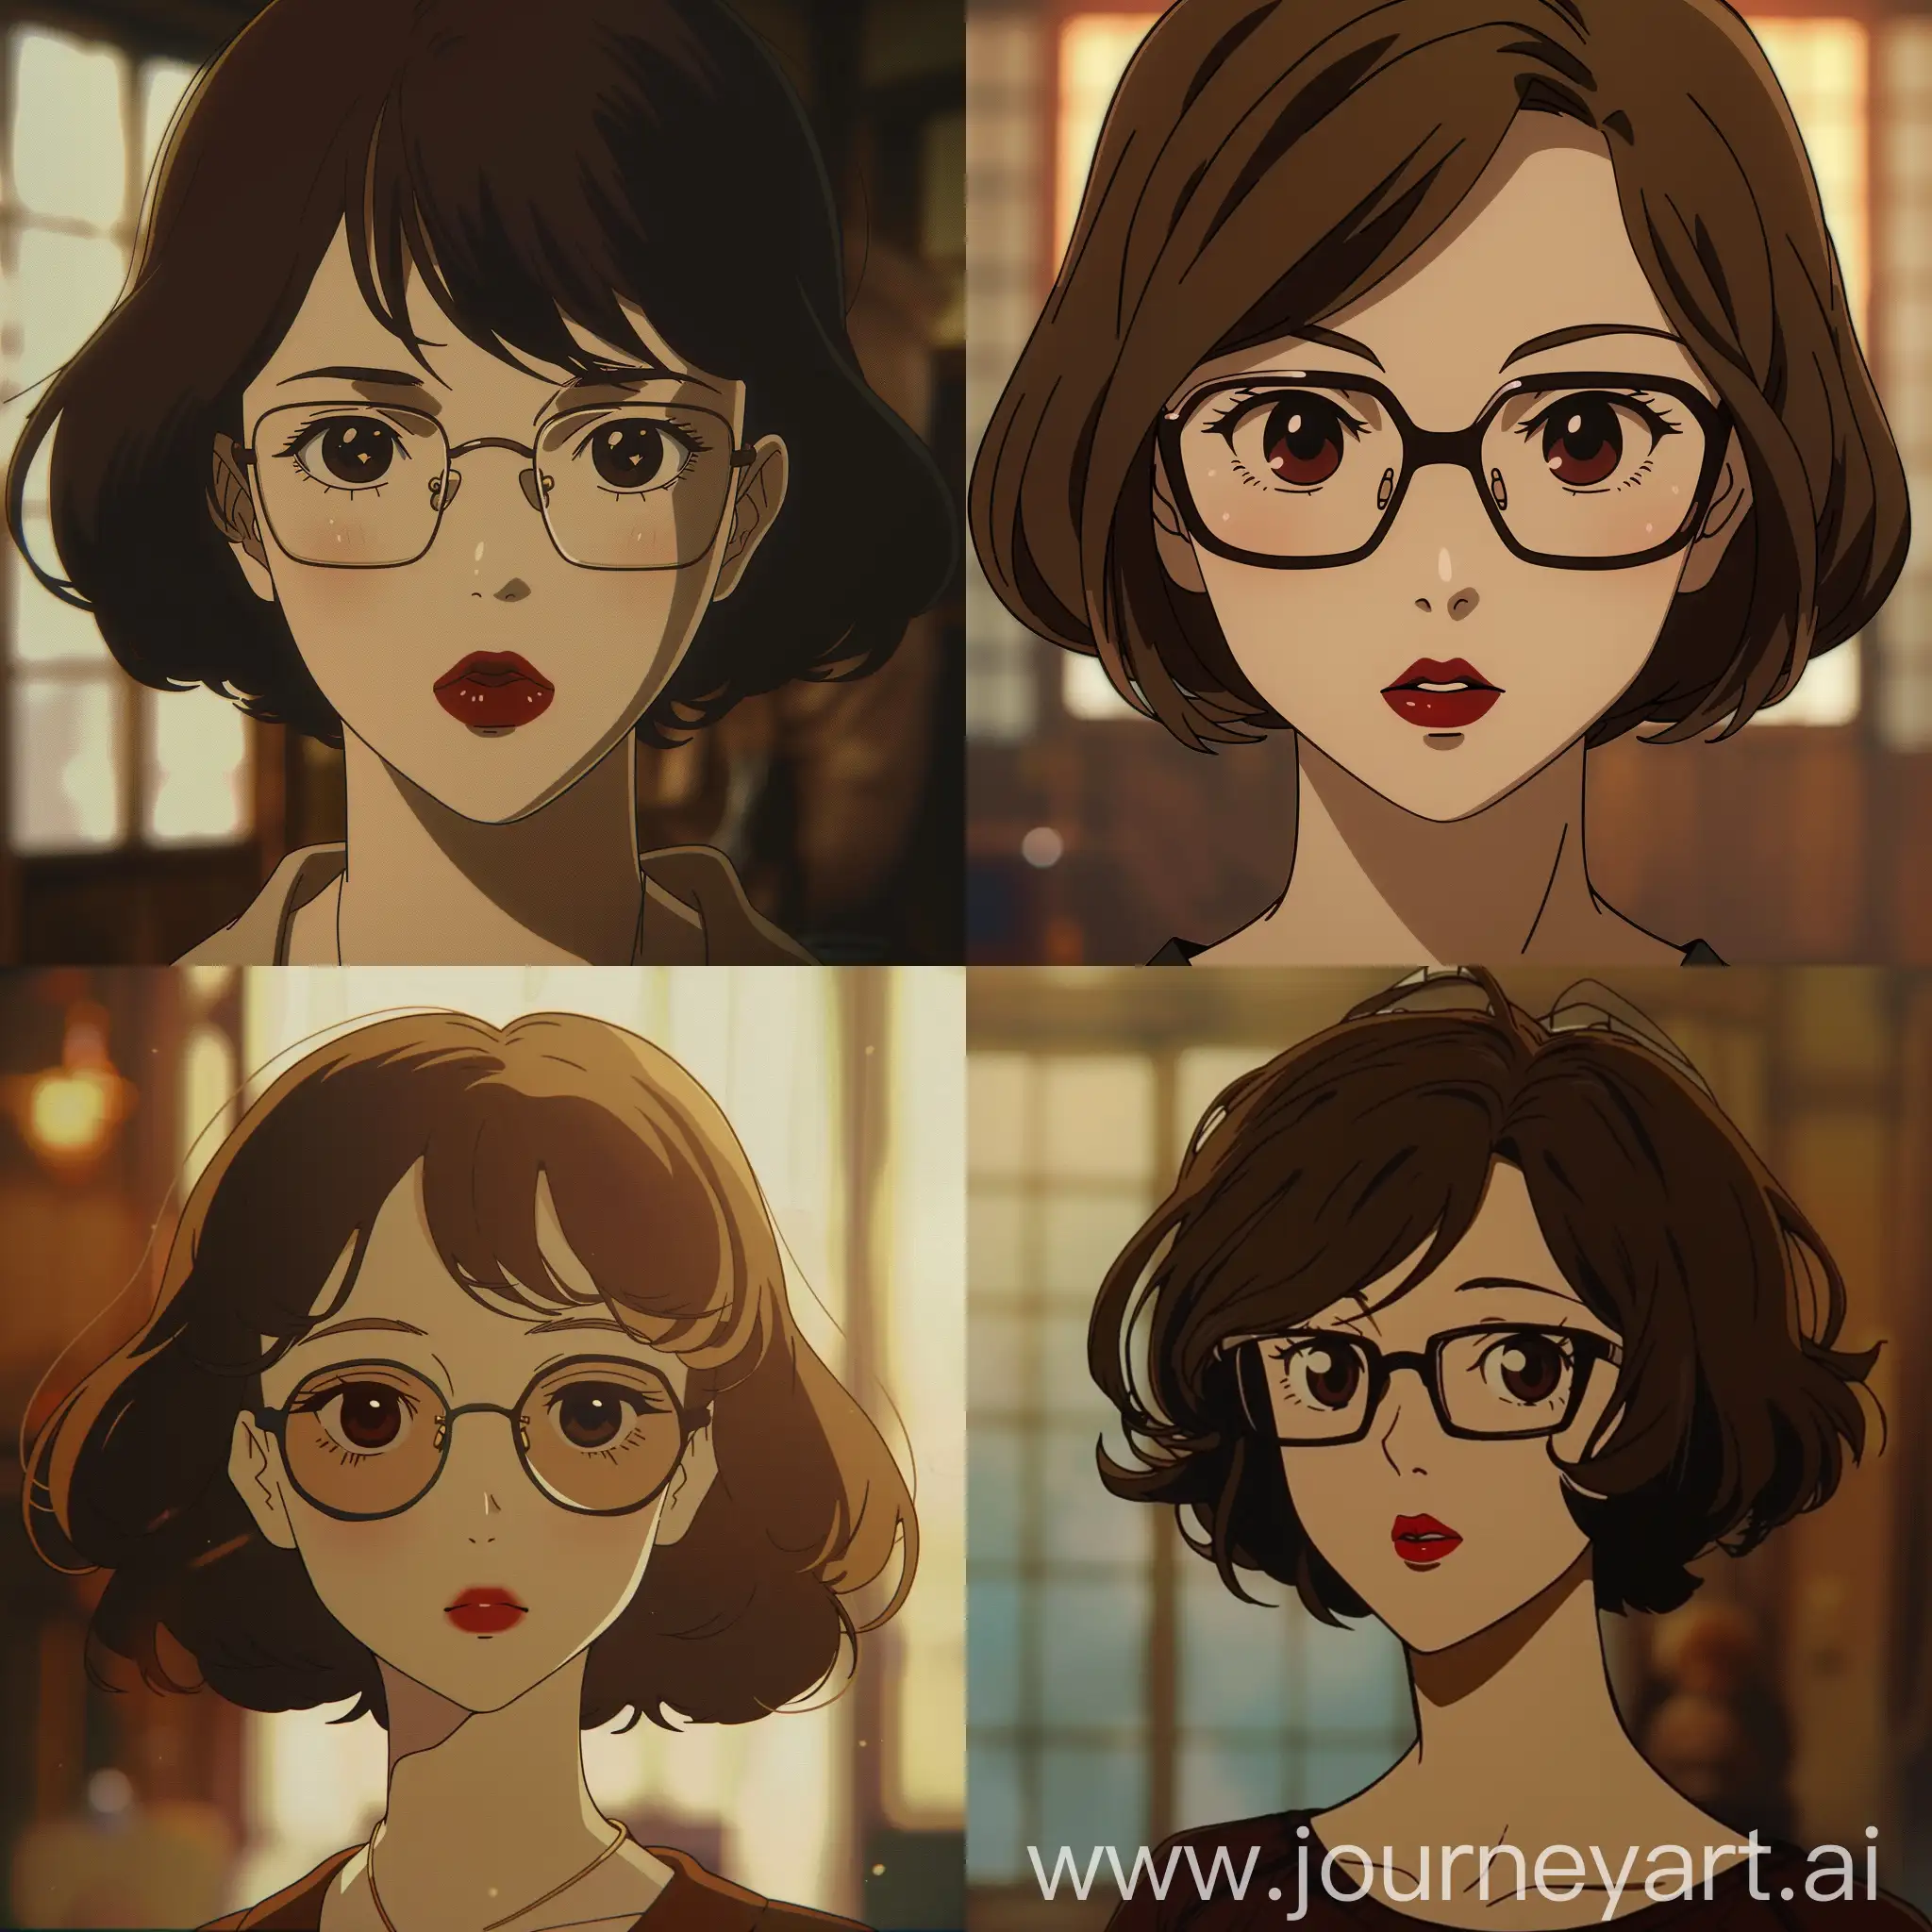 Anime-Woman-with-Short-Brown-Hair-and-Square-Glasses-in-Ghibli-Studio-Style-Portrait